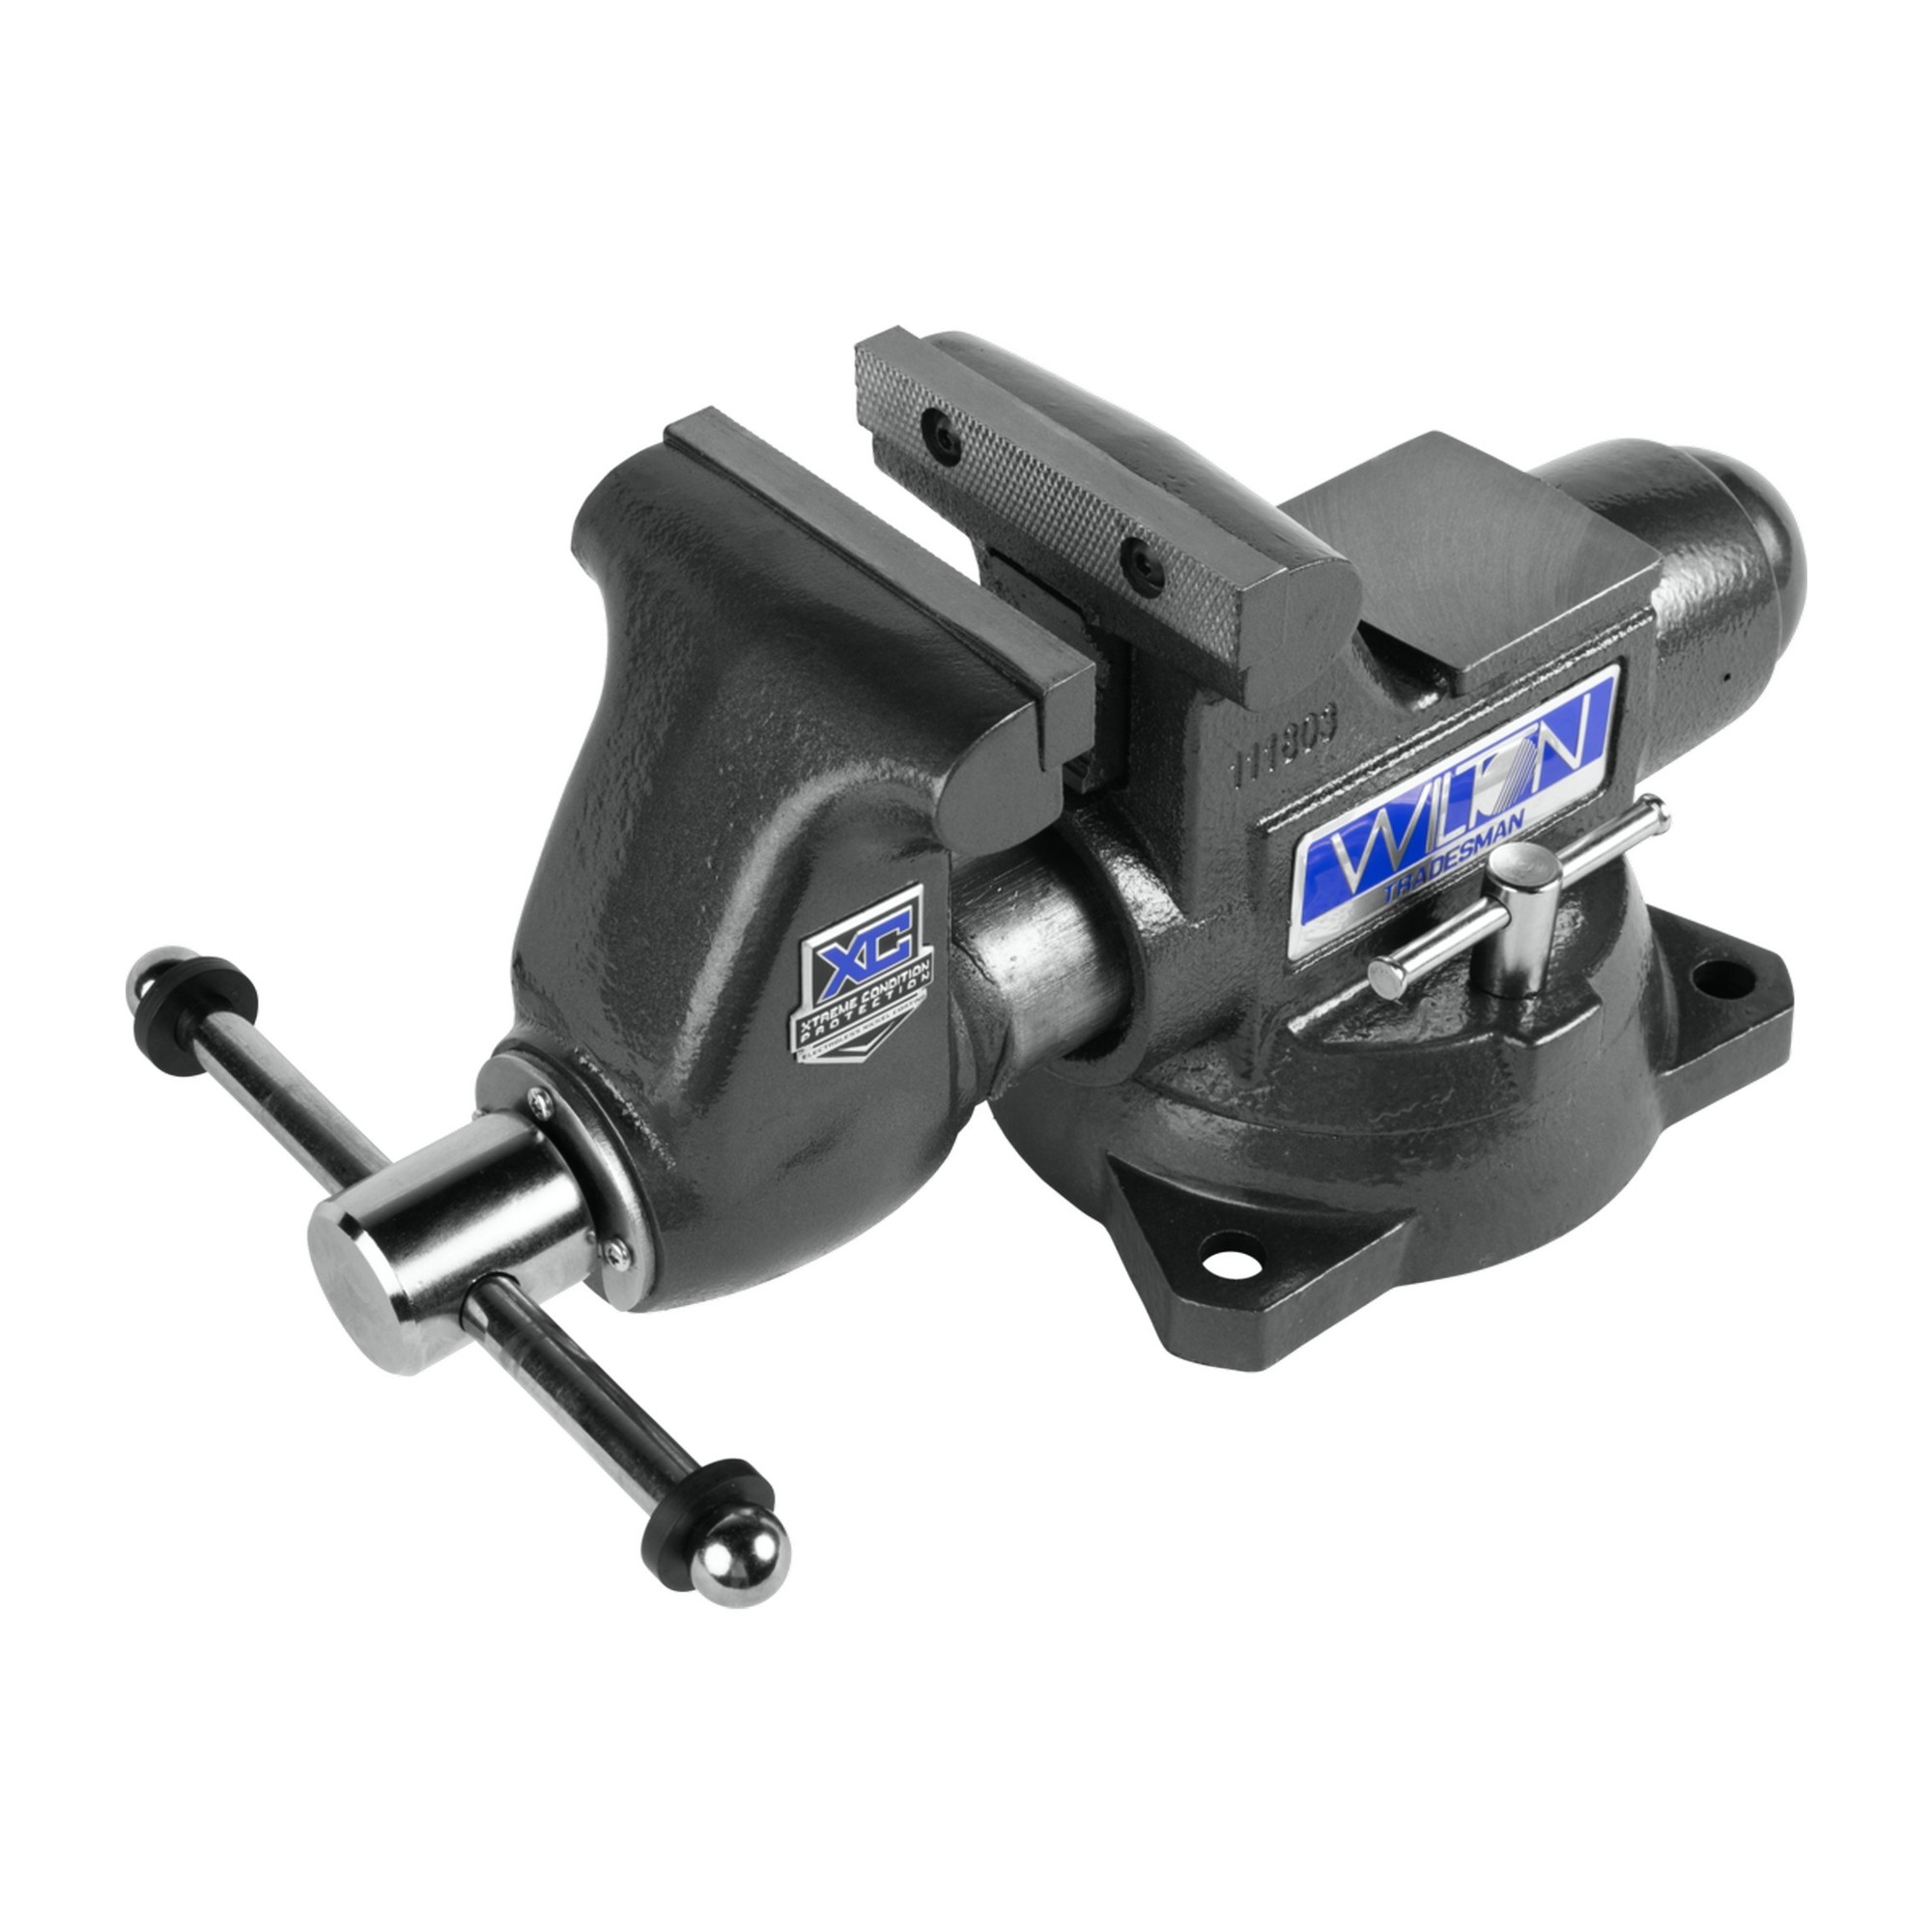 Wilton, Tradesman XC Vise, Jaw Width 4.5 in, Jaw Capacity 6 in, Material Iron, Model 1745XC -  28840